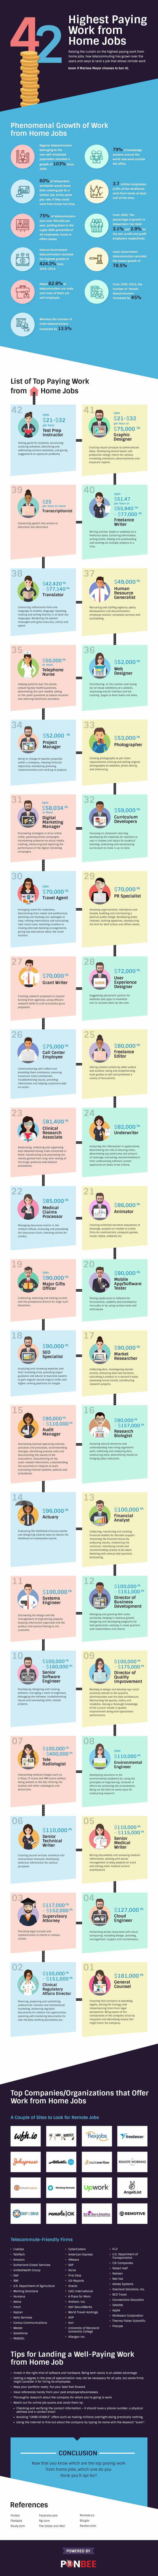 42 Highest Paying Work from Home Jobs